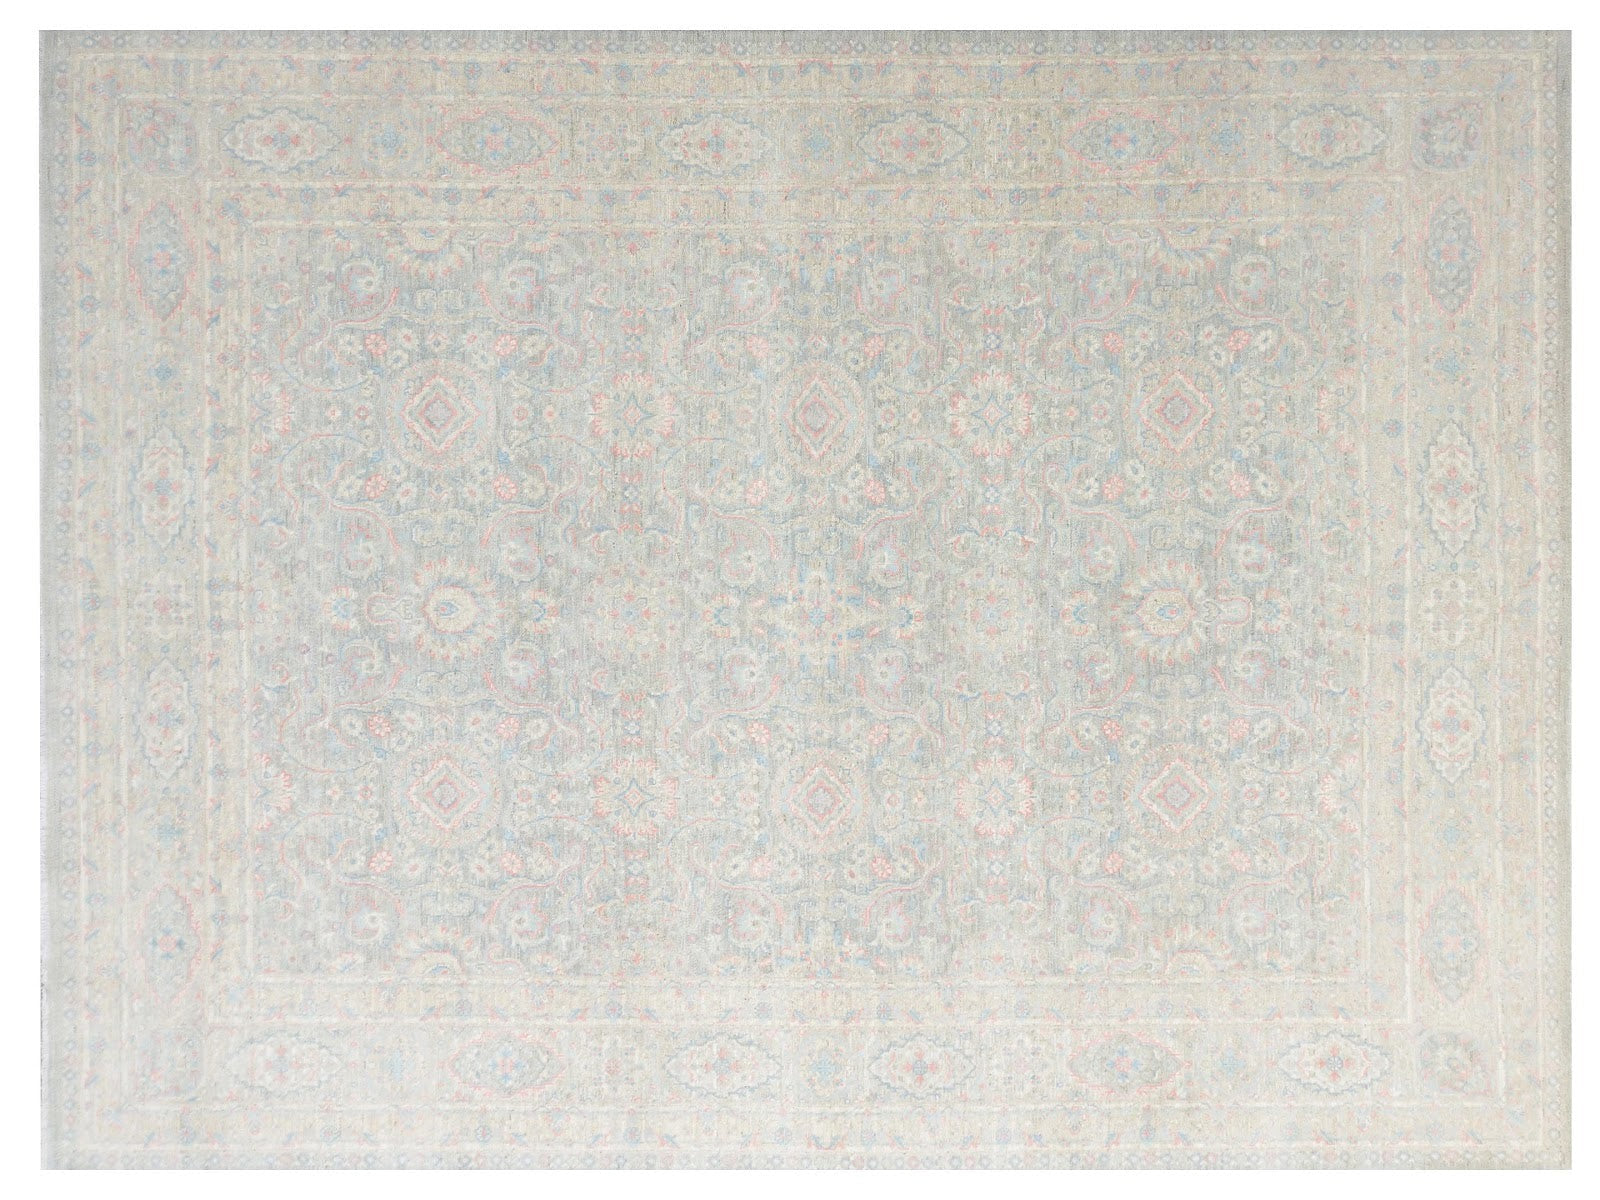 9x12 hand-knotted silk & wool Ziegler rug with transitional design and soft neutral hues